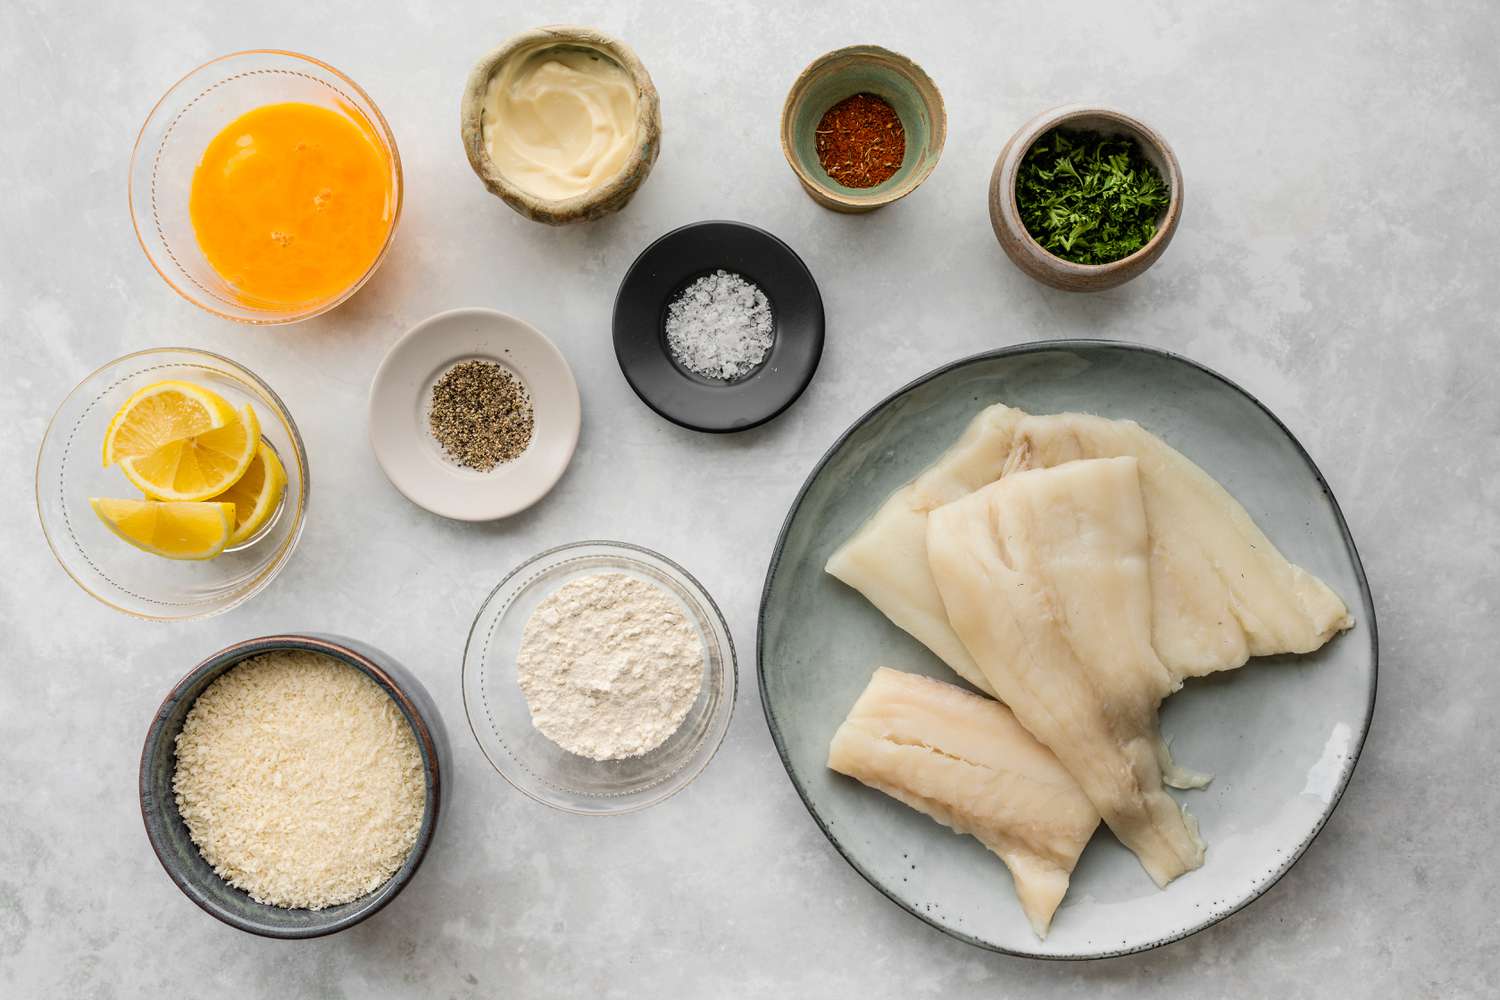 Ingredients for panko-crusted haddock recipe gathered